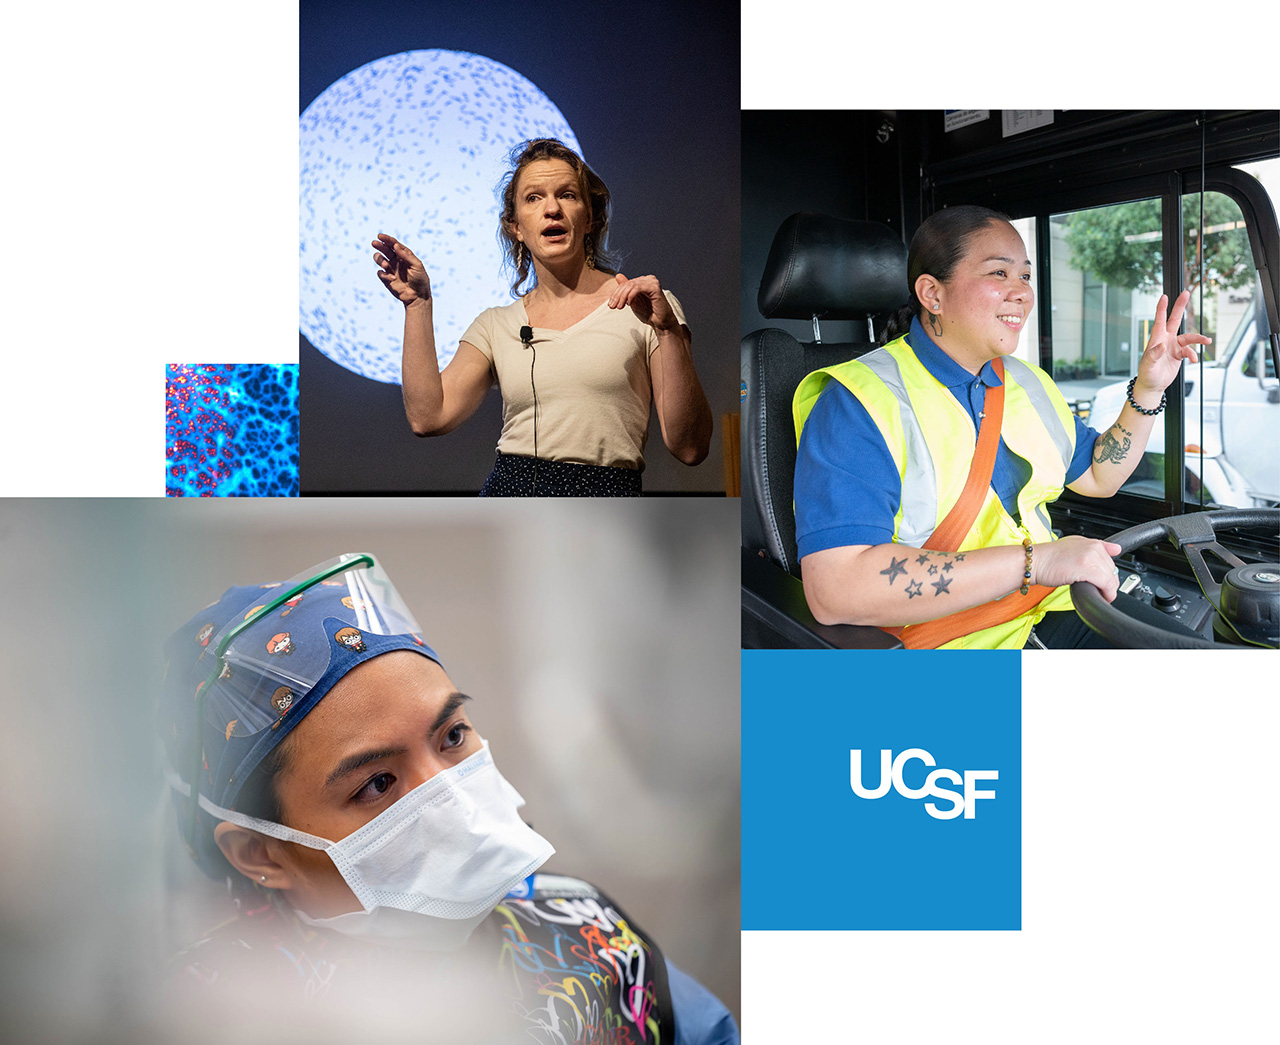 A collage of a postdoc presenting their work, a driver operating a shuttle, and an anesthetist wearing protective gear